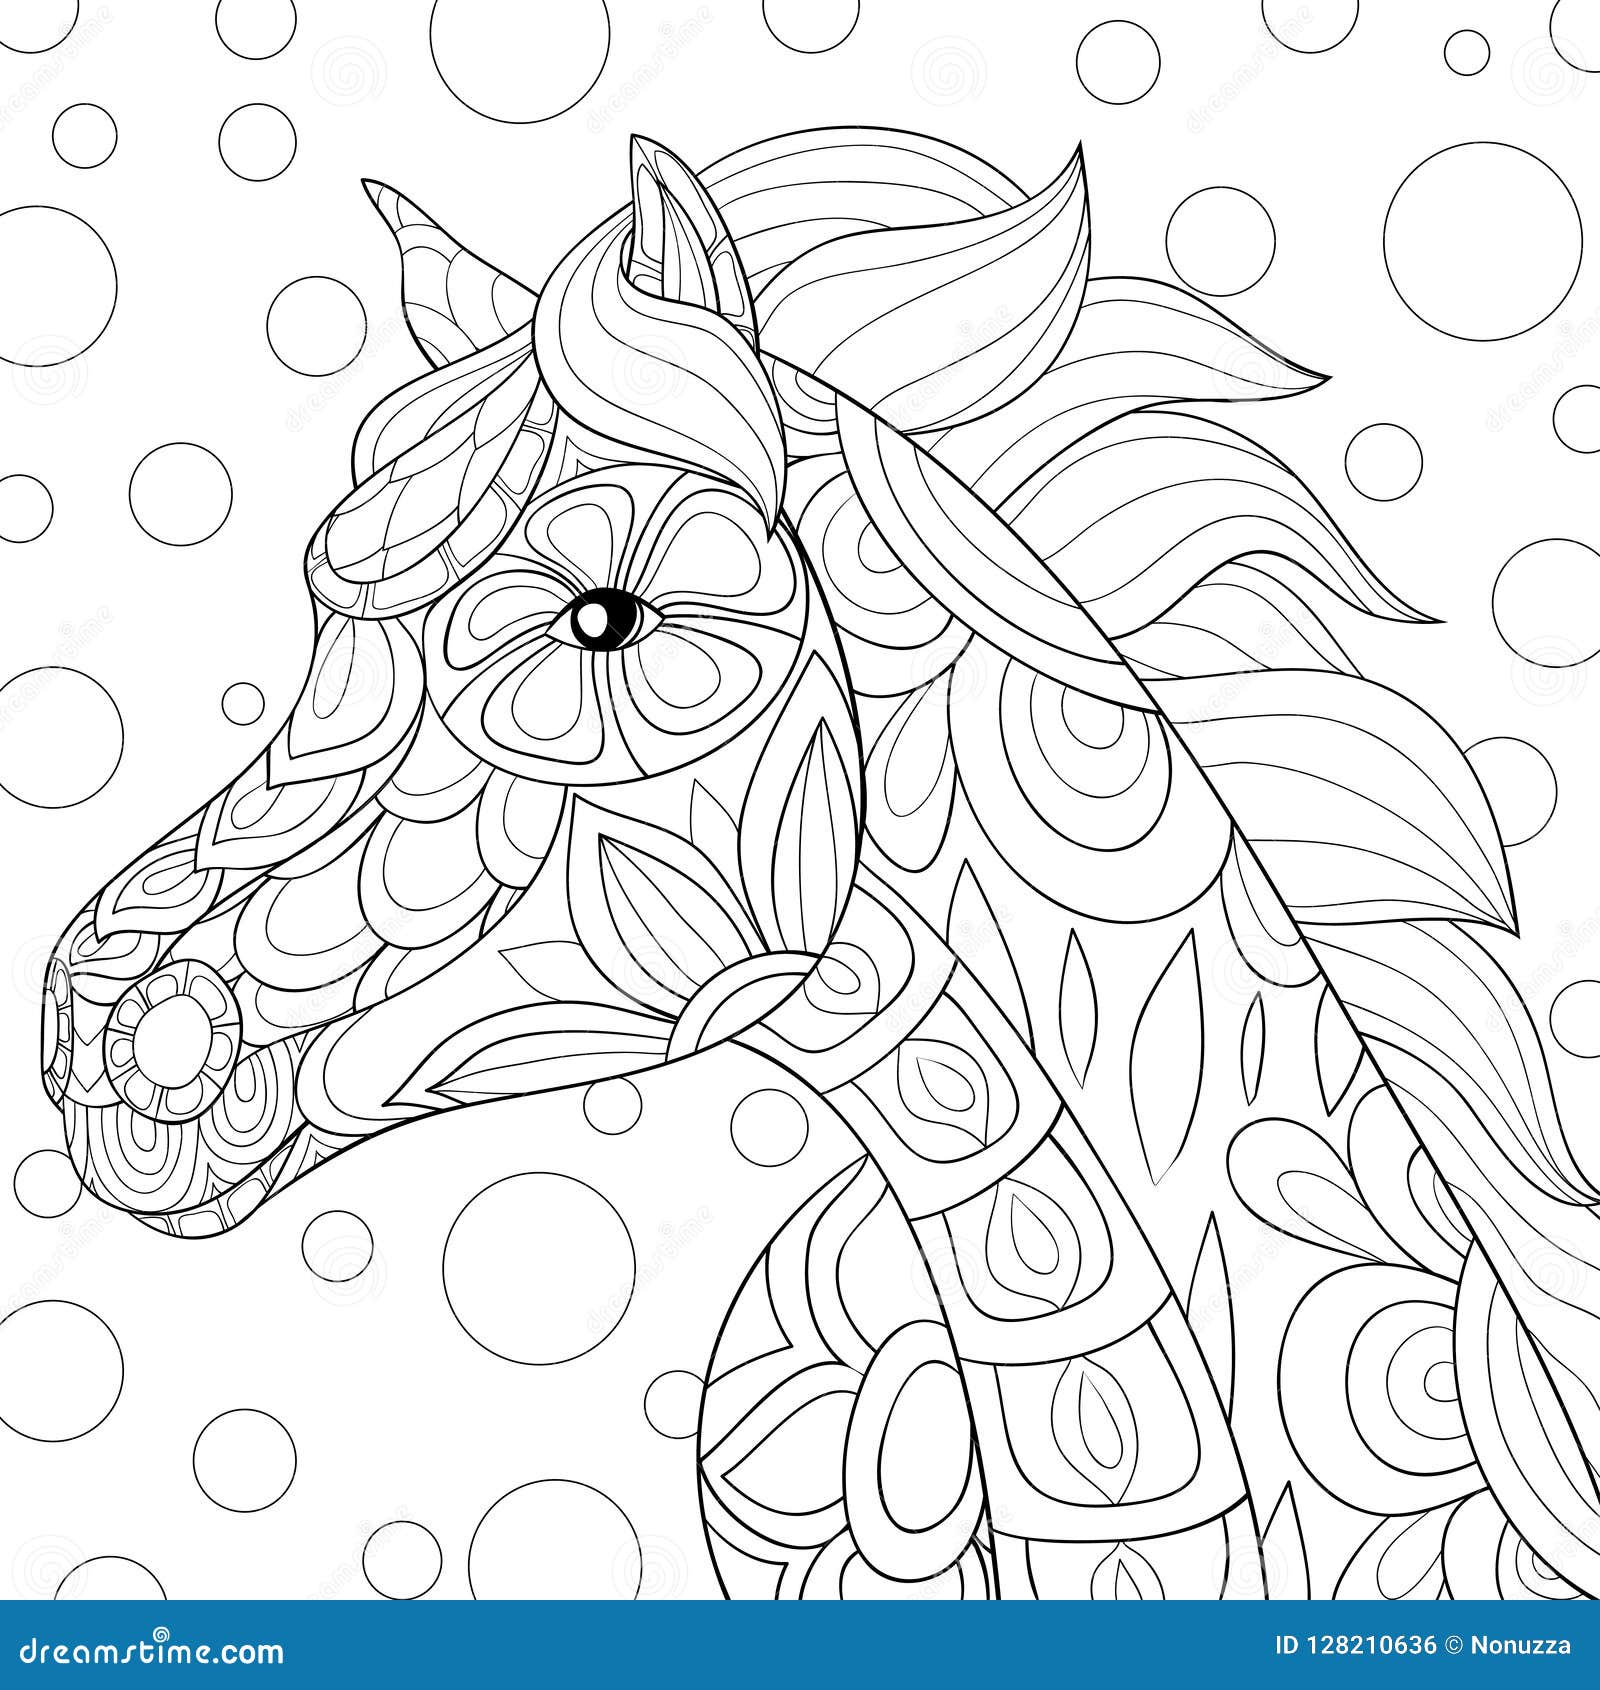 Adult Coloring Book,page a Cute Horse,unicorn Image for Relaxing ...